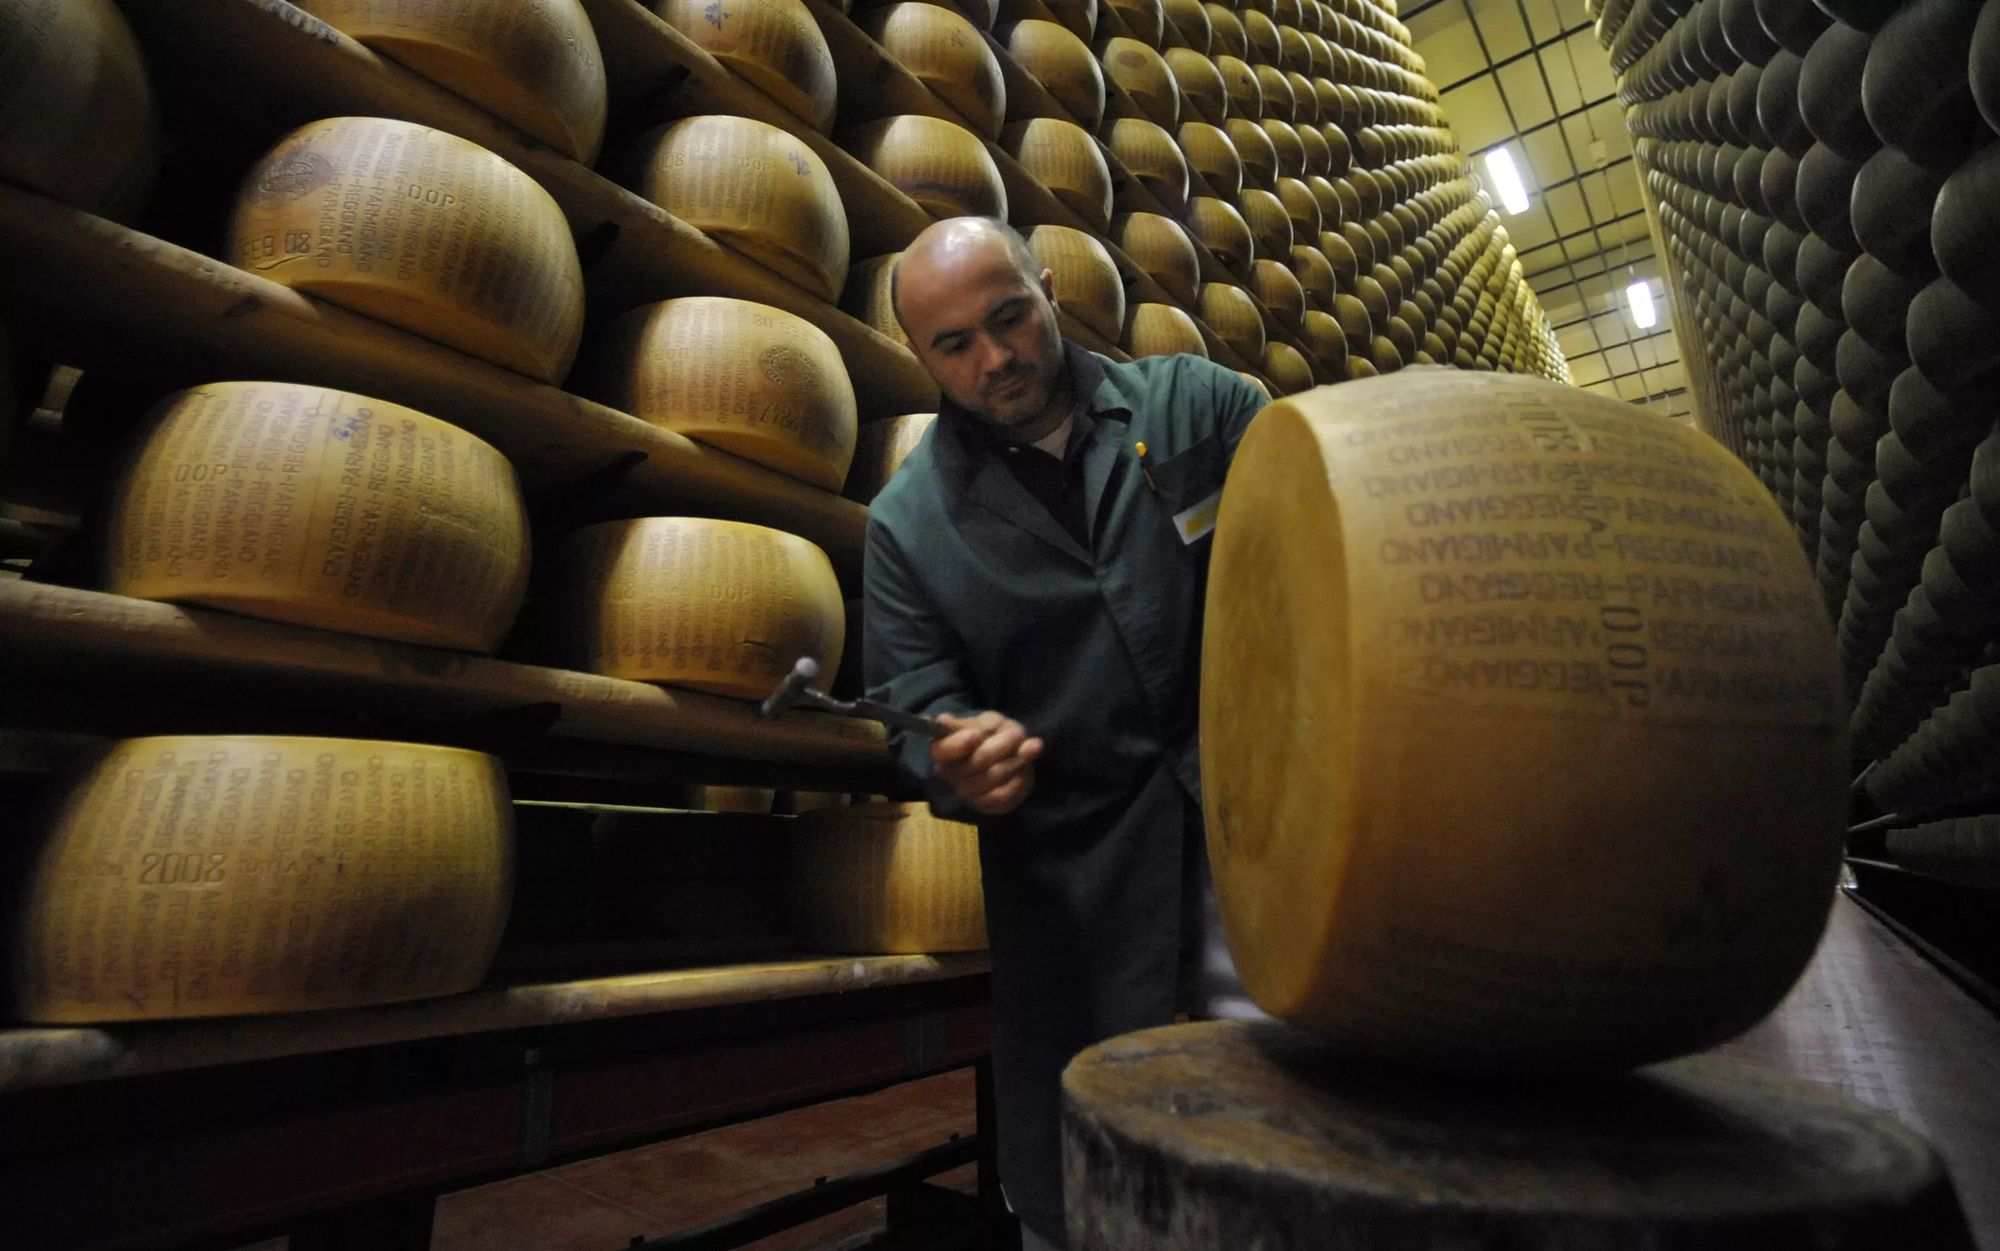 Cheesemakers are embedding tiny tracking chips in parmesan to tackle counterfeit cheese